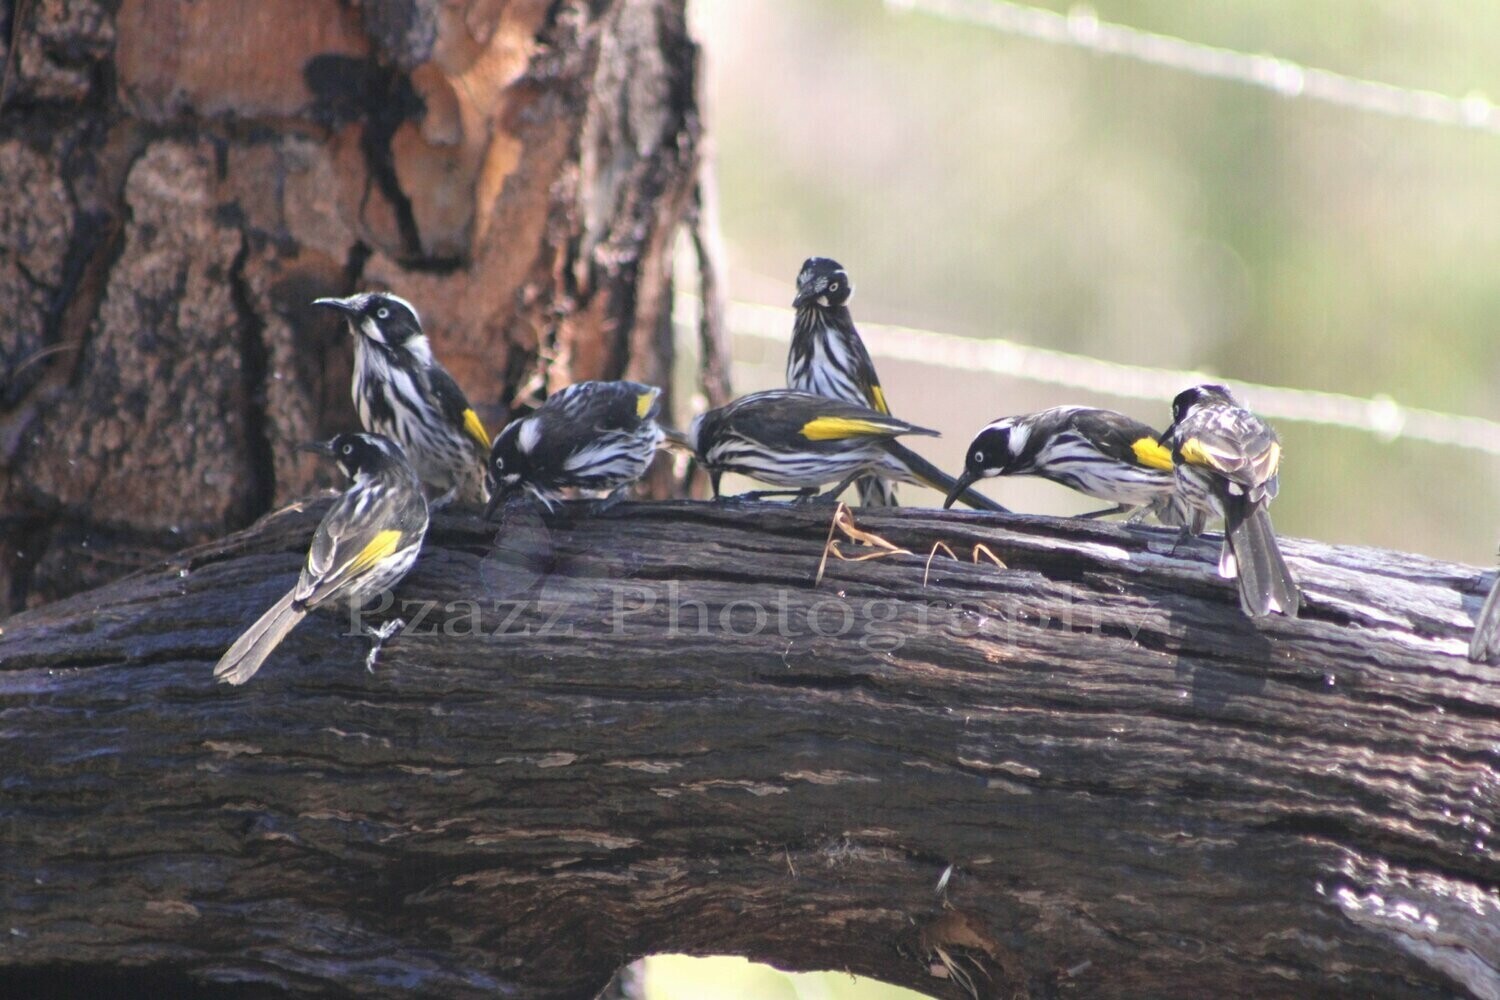 Pzazz Photography - Honey Eaters - Specially ordered for you. Delivery is approximately 4 - 6 weeks.